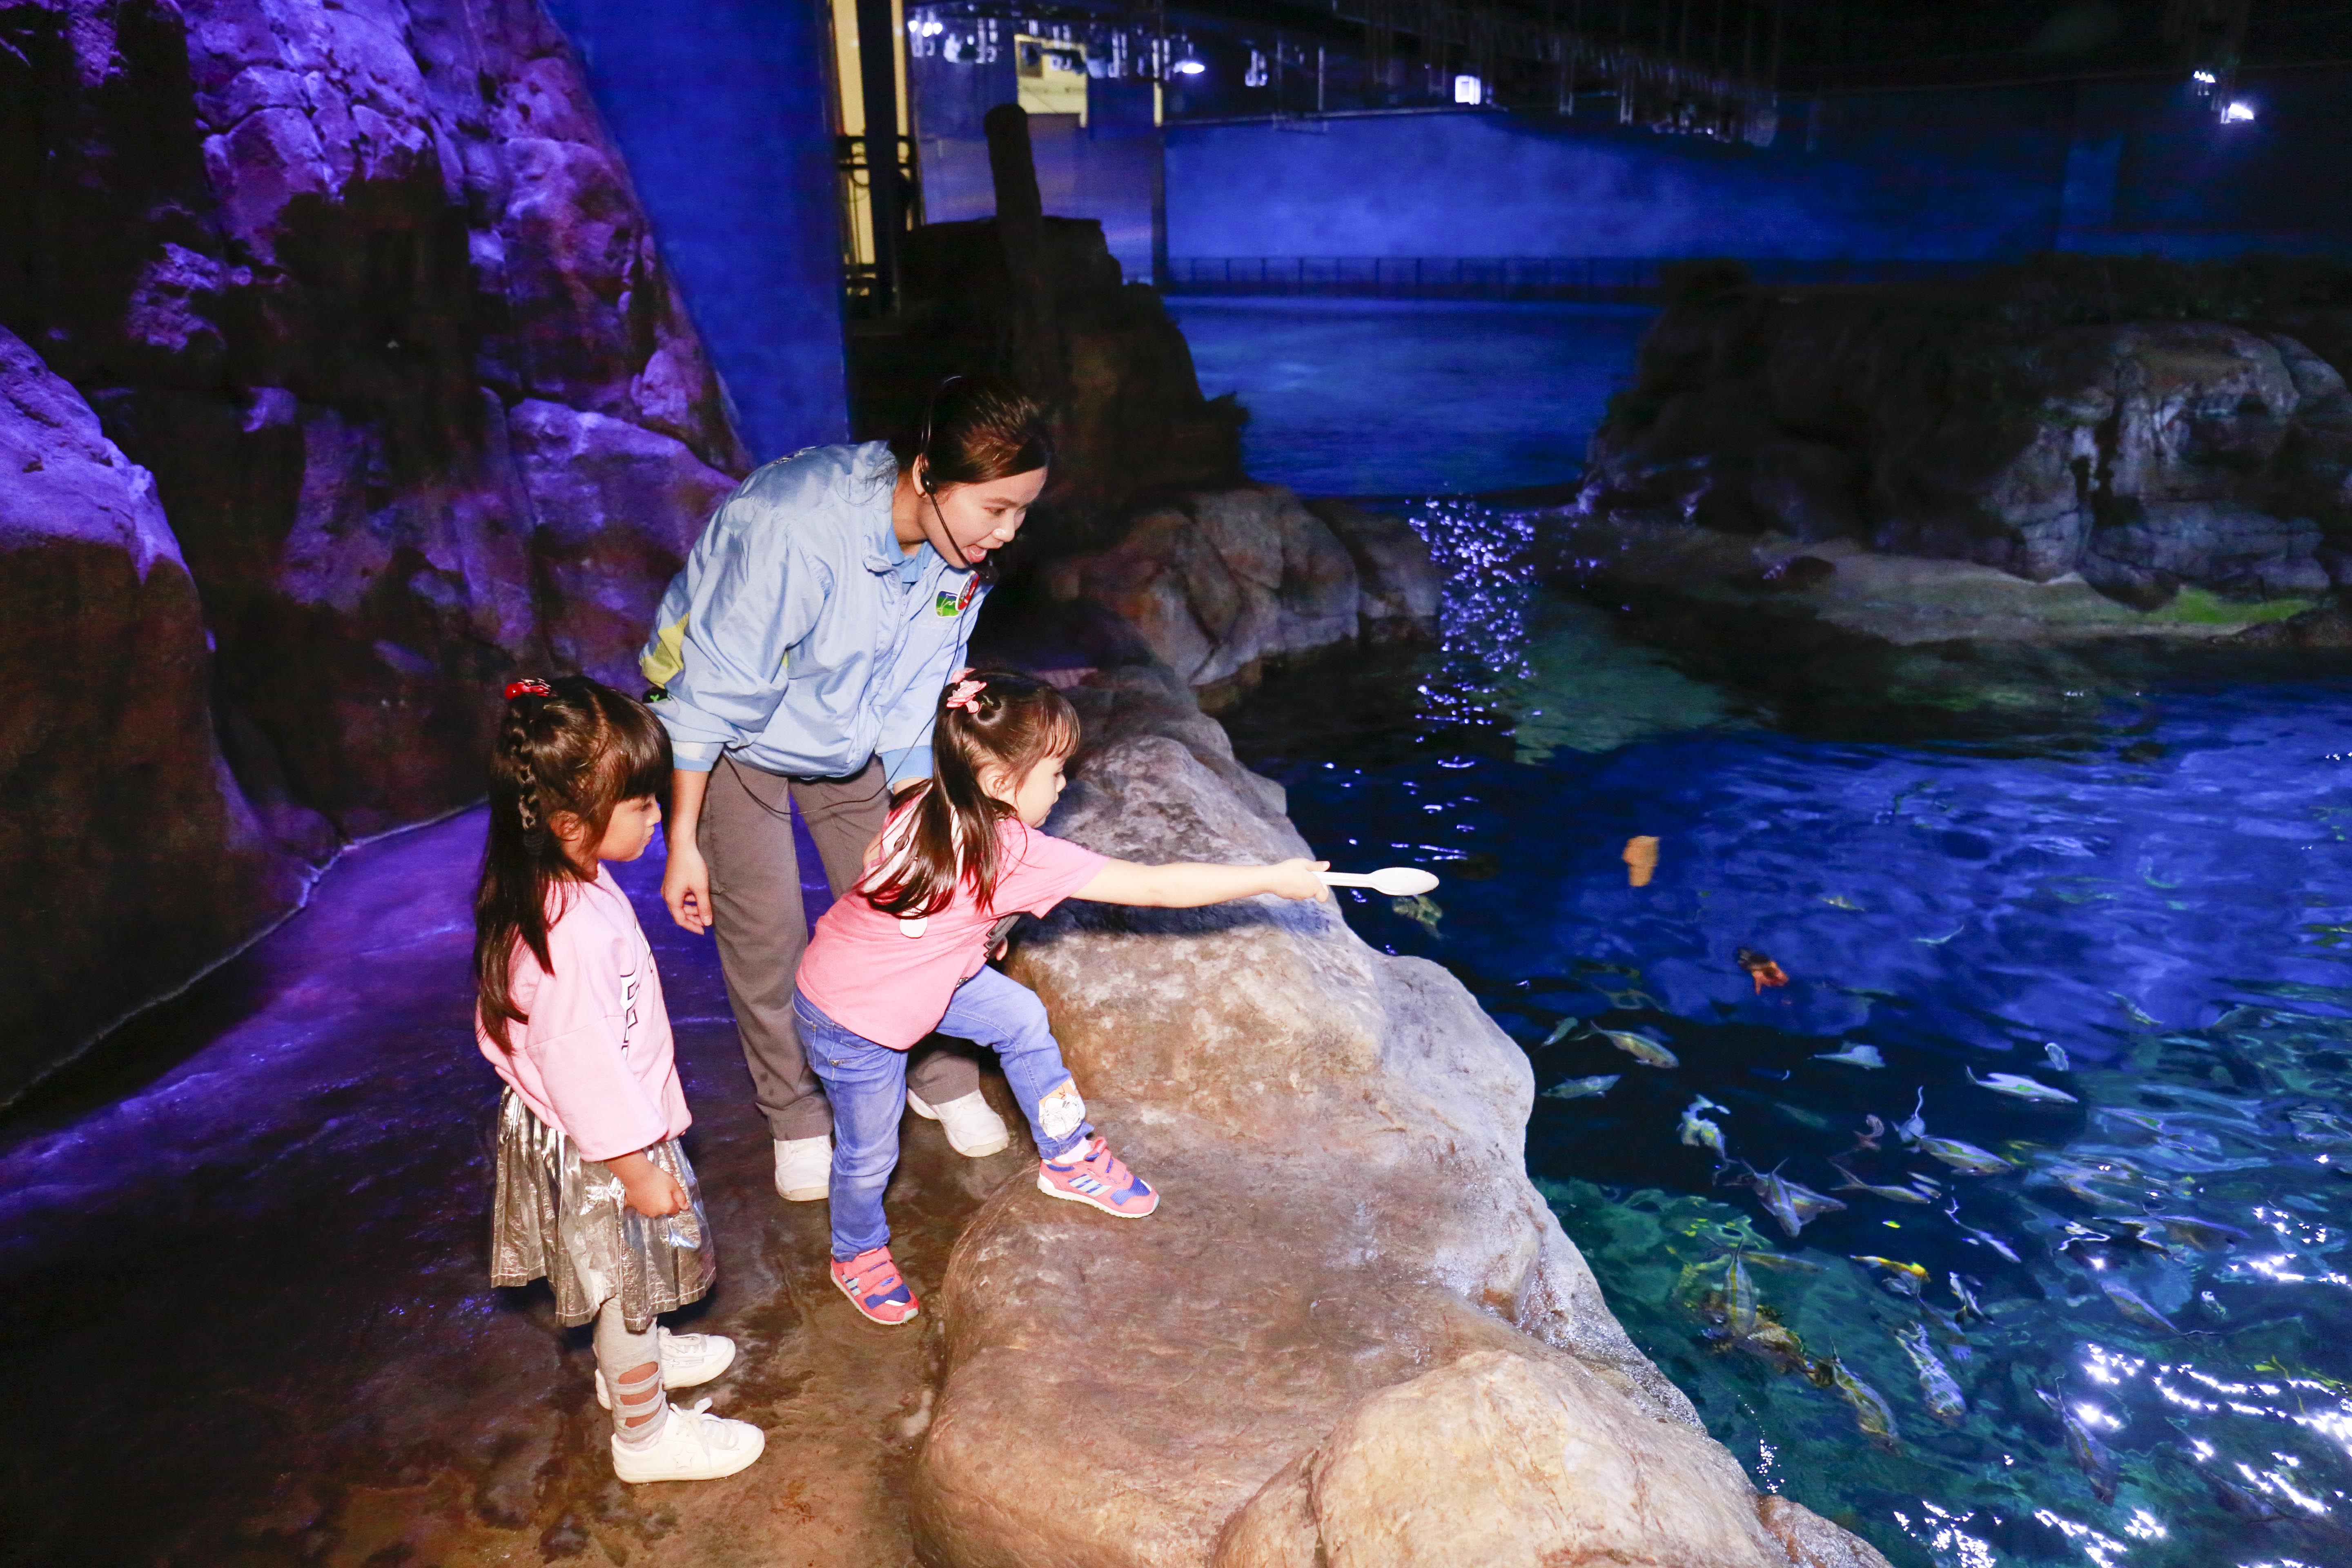 Go behind the scenes of Grand Aquarium and help serve a plentiful meal for coral reef fishes